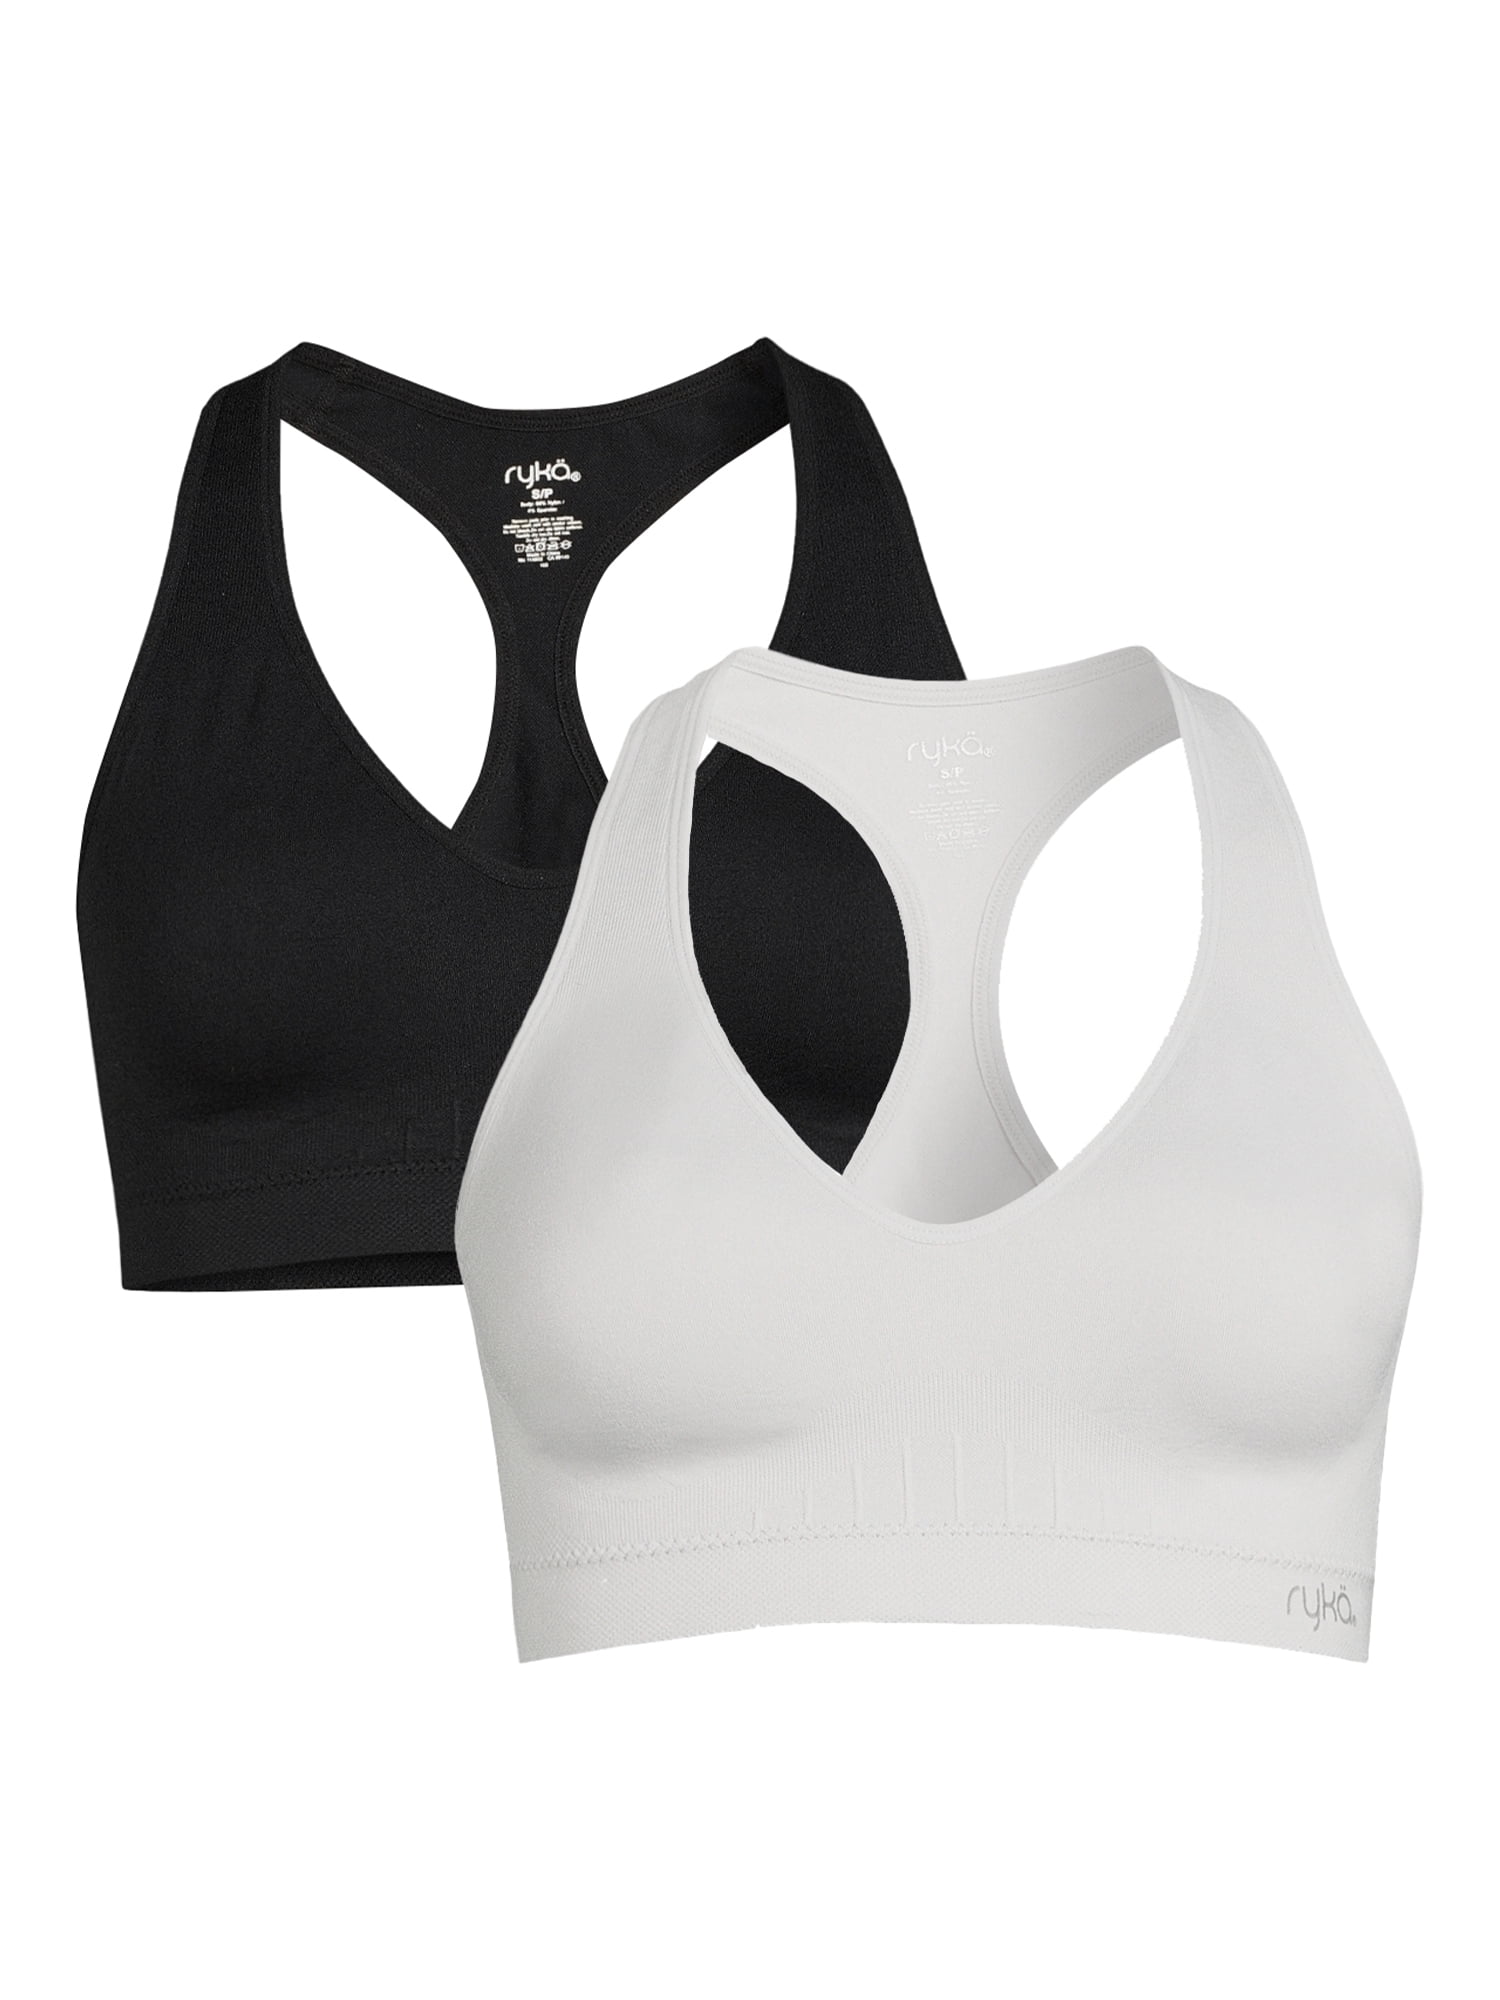 Just Intimates Women's 2 Pack Racerback Sports Bra Size New with tags 